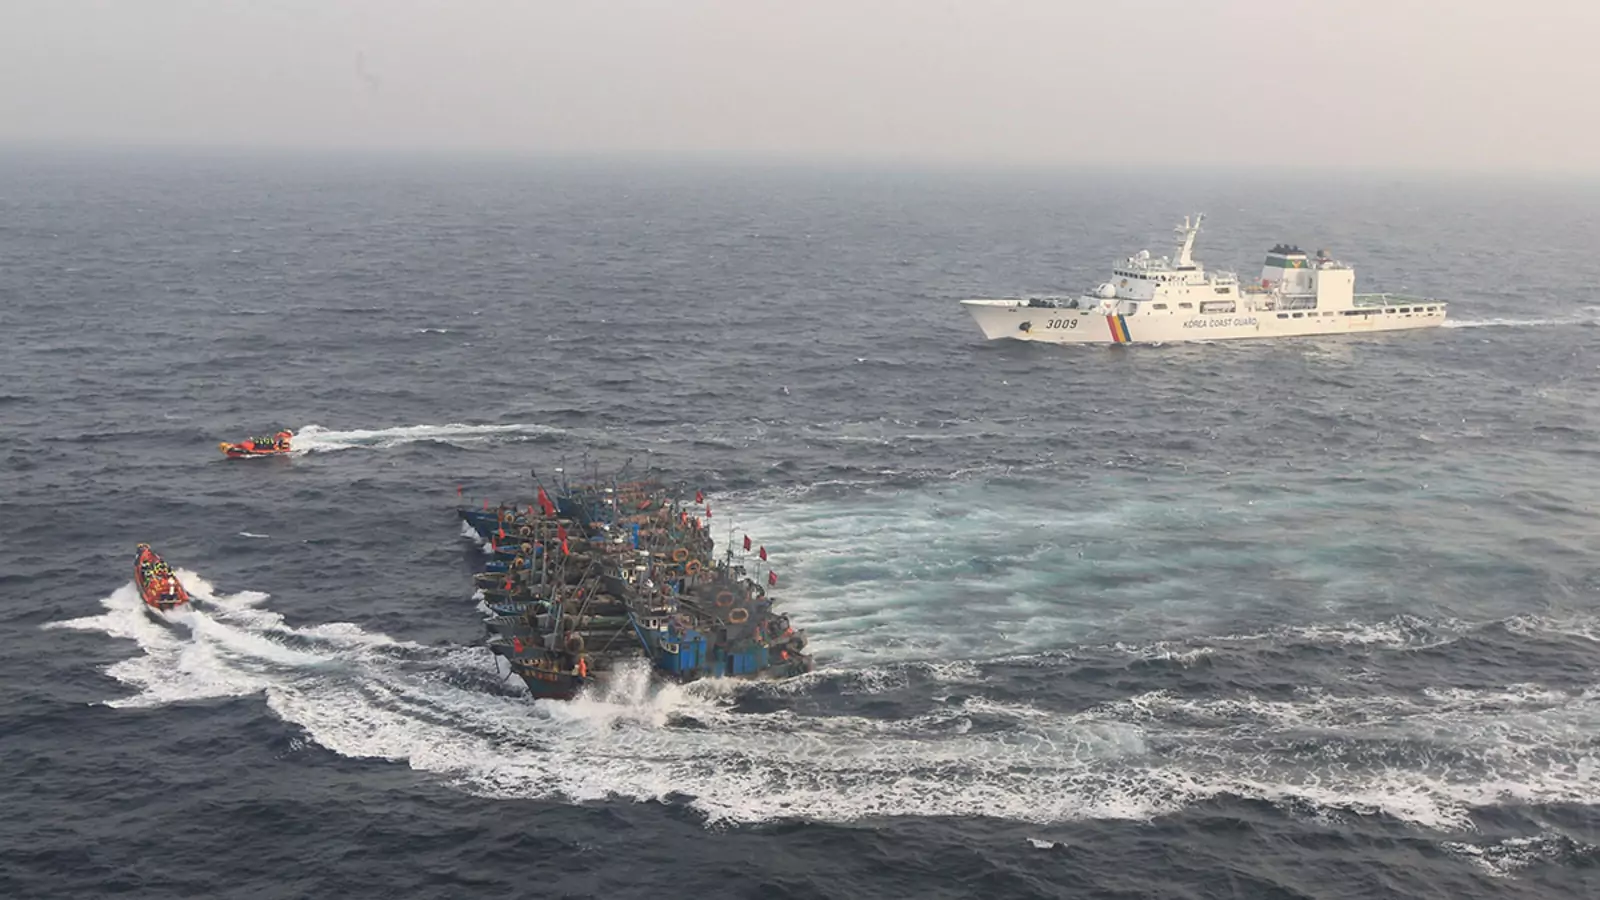 Chinese fishing boats band together to thwart an attempt by Korea Coast Guard ships to stop alleged illegal fishing in the Yellow Sea.